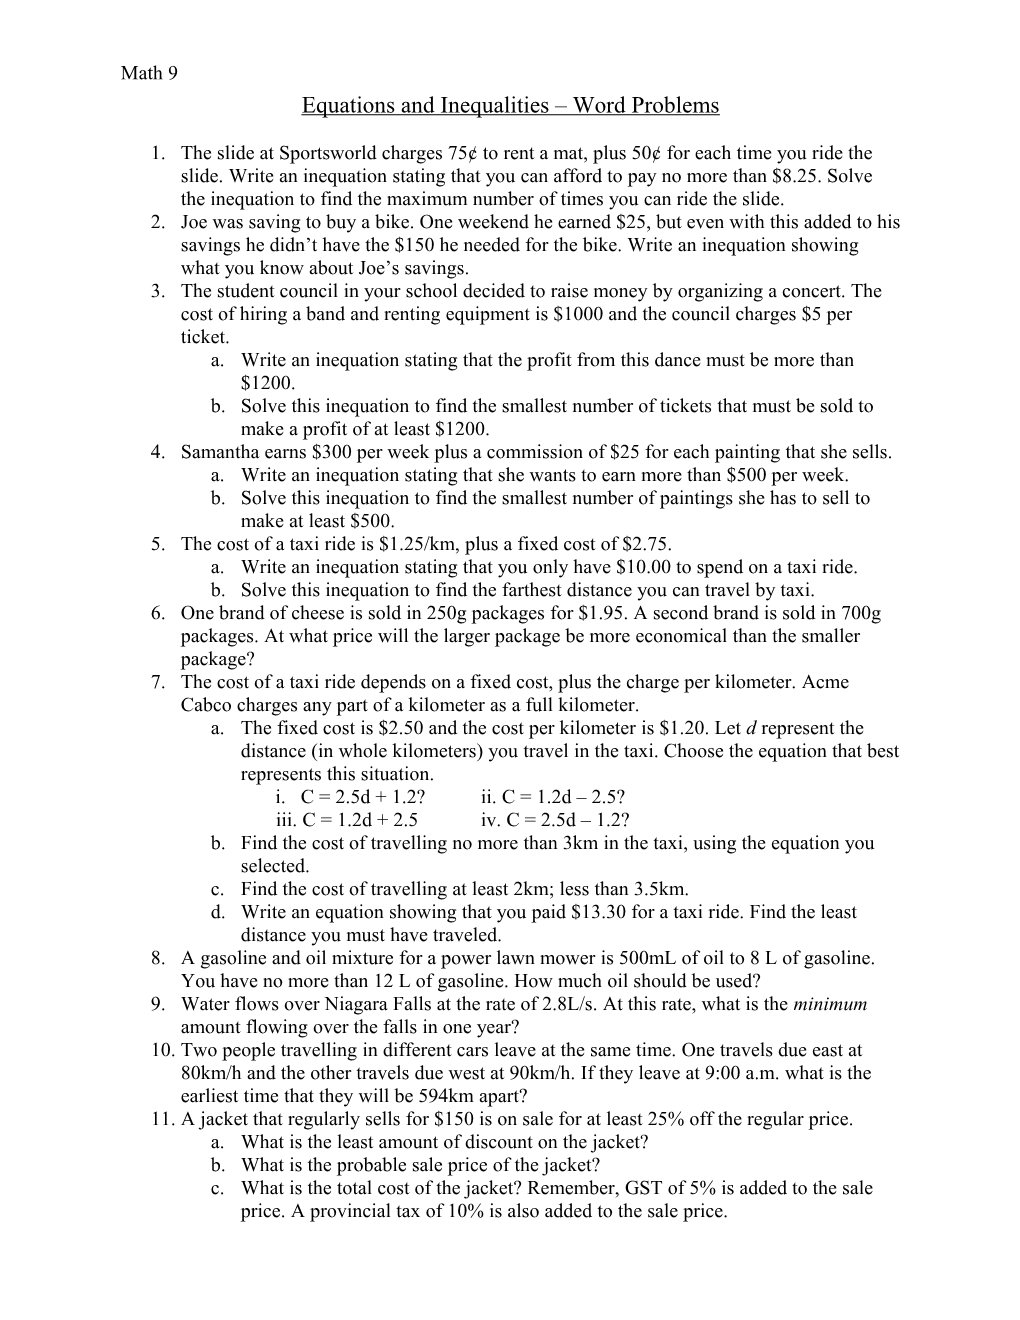 Equations and Inequalities Word Problems